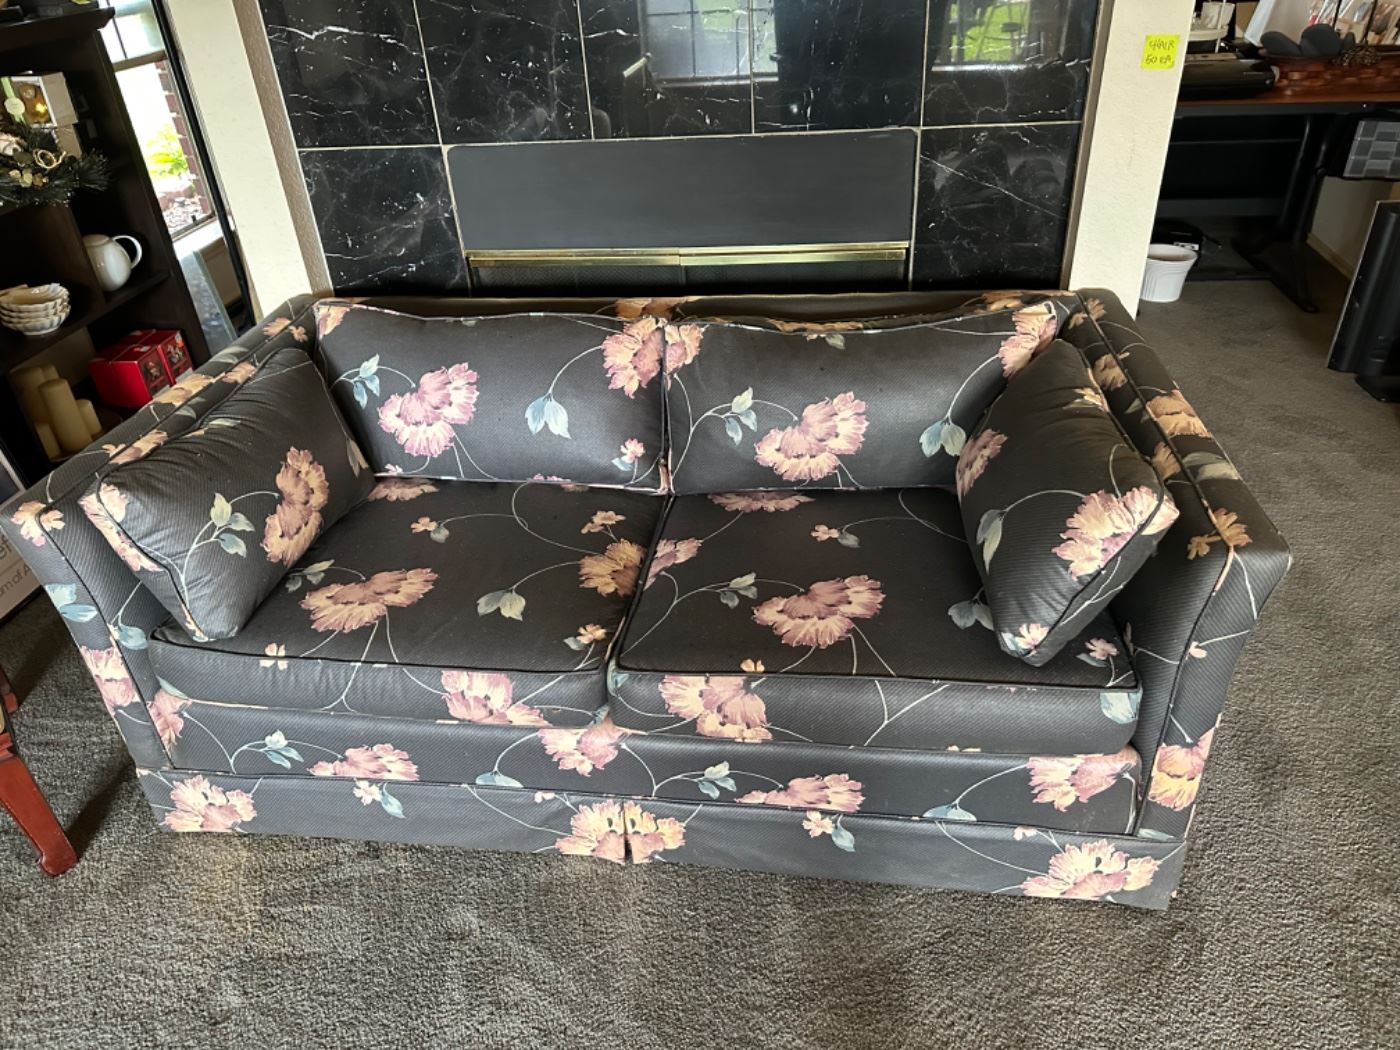 Floral print loveseat.  Great heavy construction.  2 available. $100 each